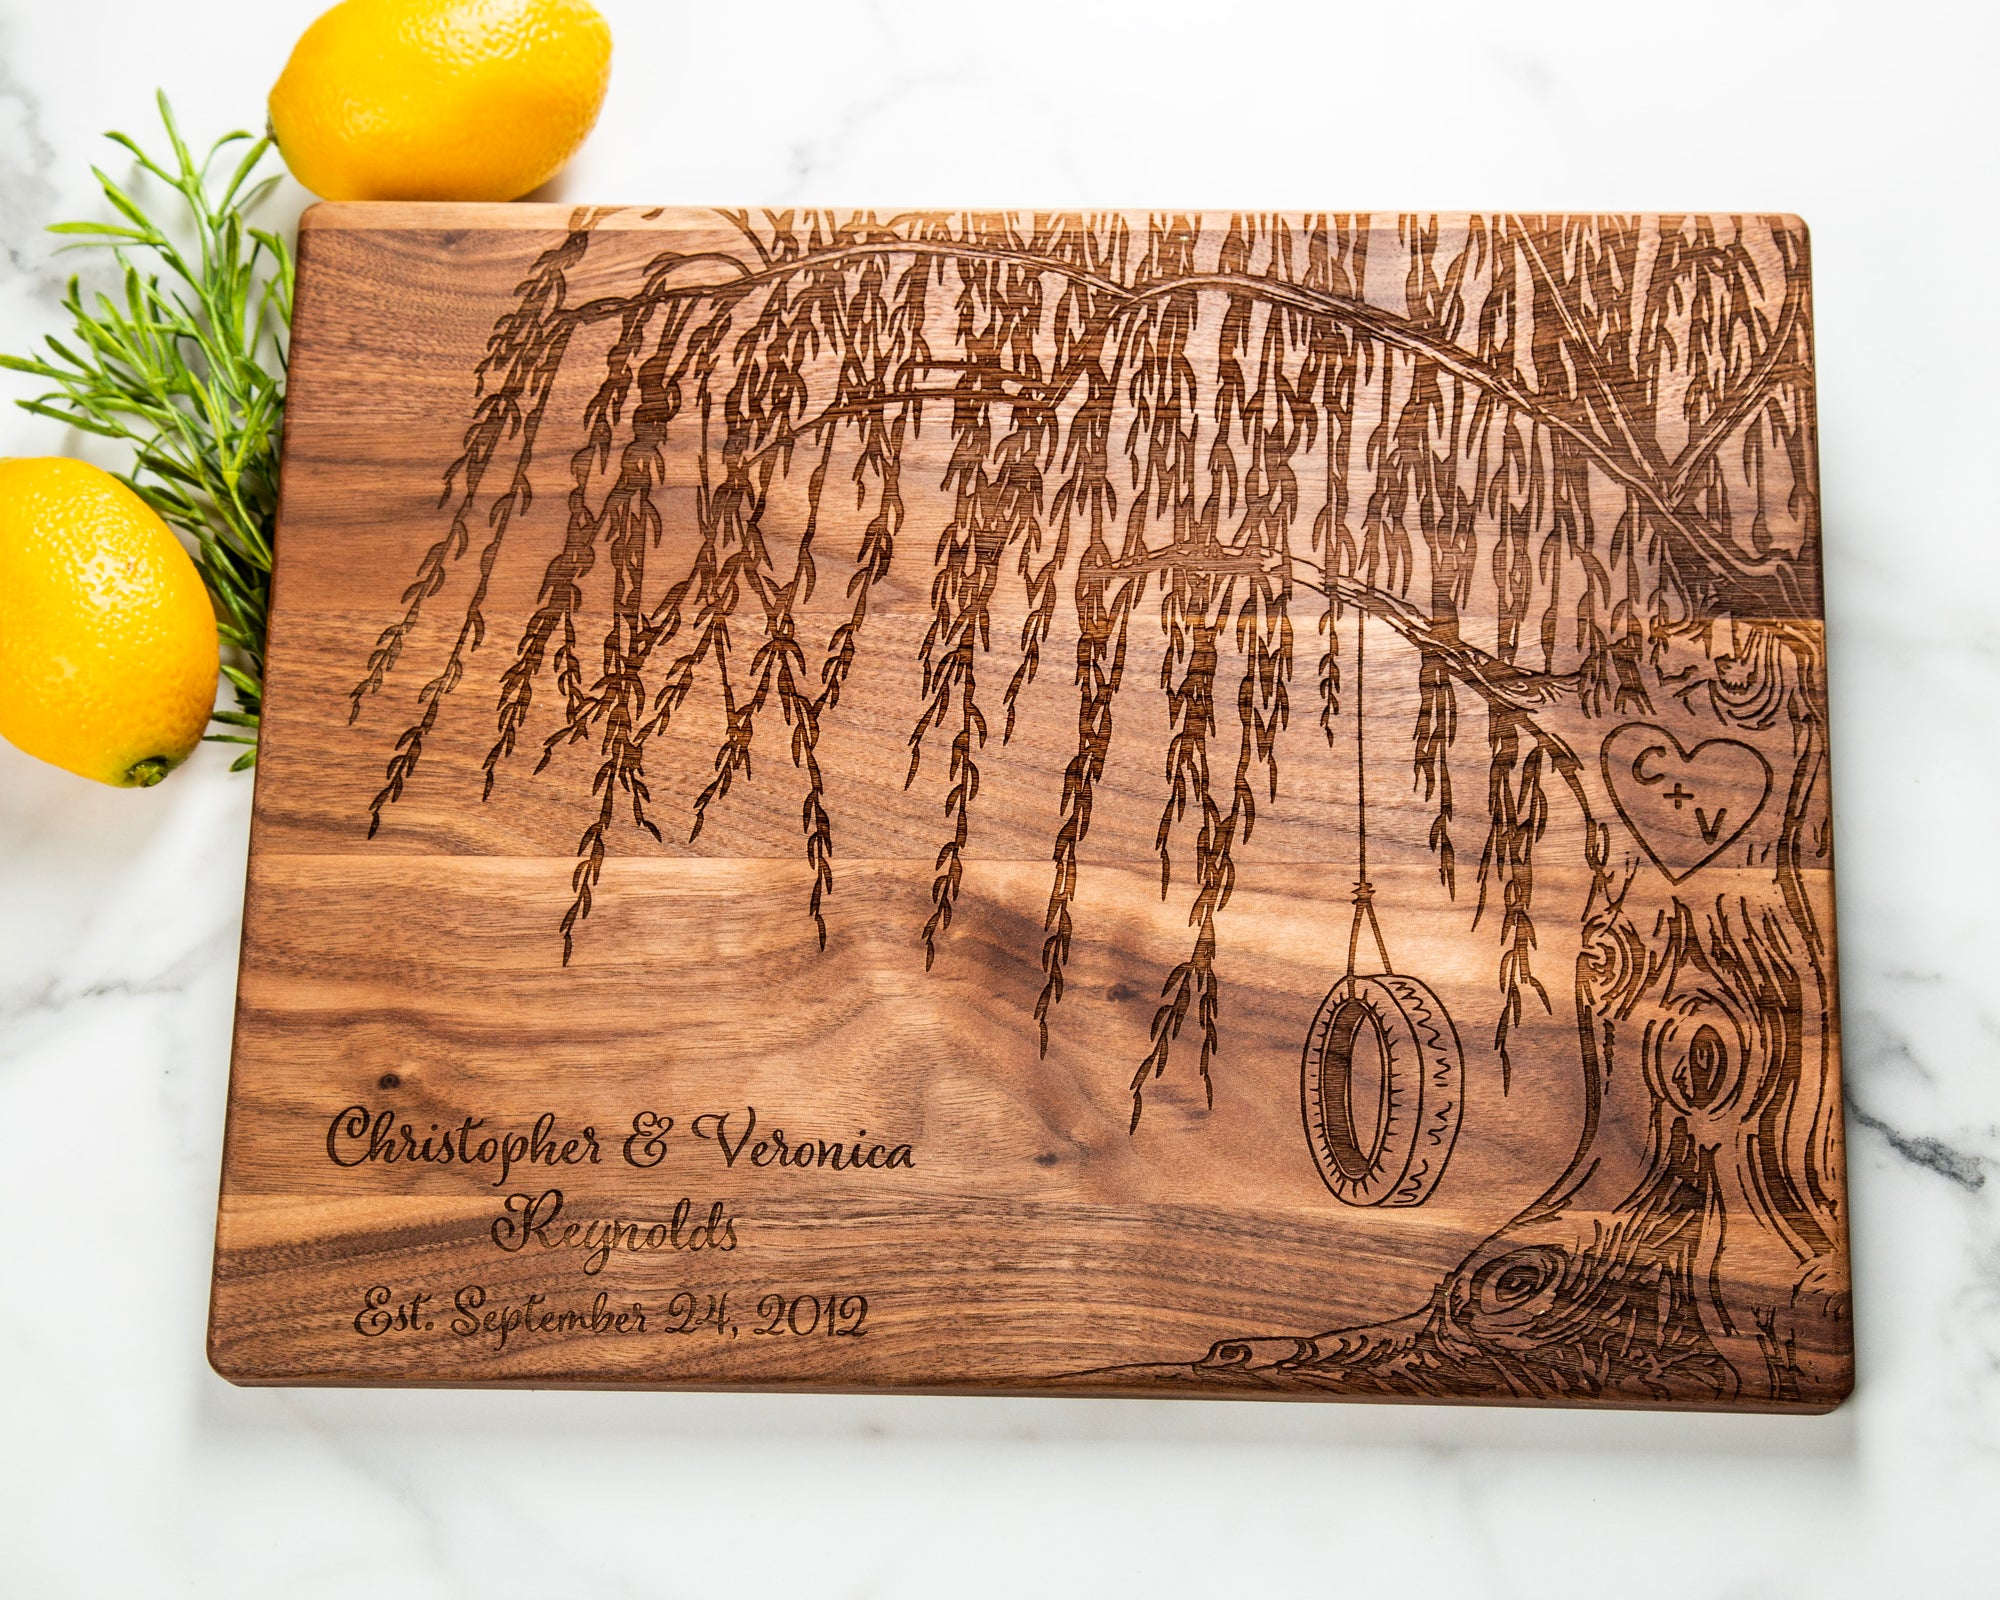 This 9th anniversary gift is perfect for any special occasion. Our personalized cutting board, with a Willow Tree design, is both unique and beautiful. Its hardwood construction is designed to last for years, making it an ideal housewarming, wedding, or anniversary gift. Letting you show your thoughtfulness with its personalized touch, https://www.amazon.com/gp/product/B09D5WF1T7